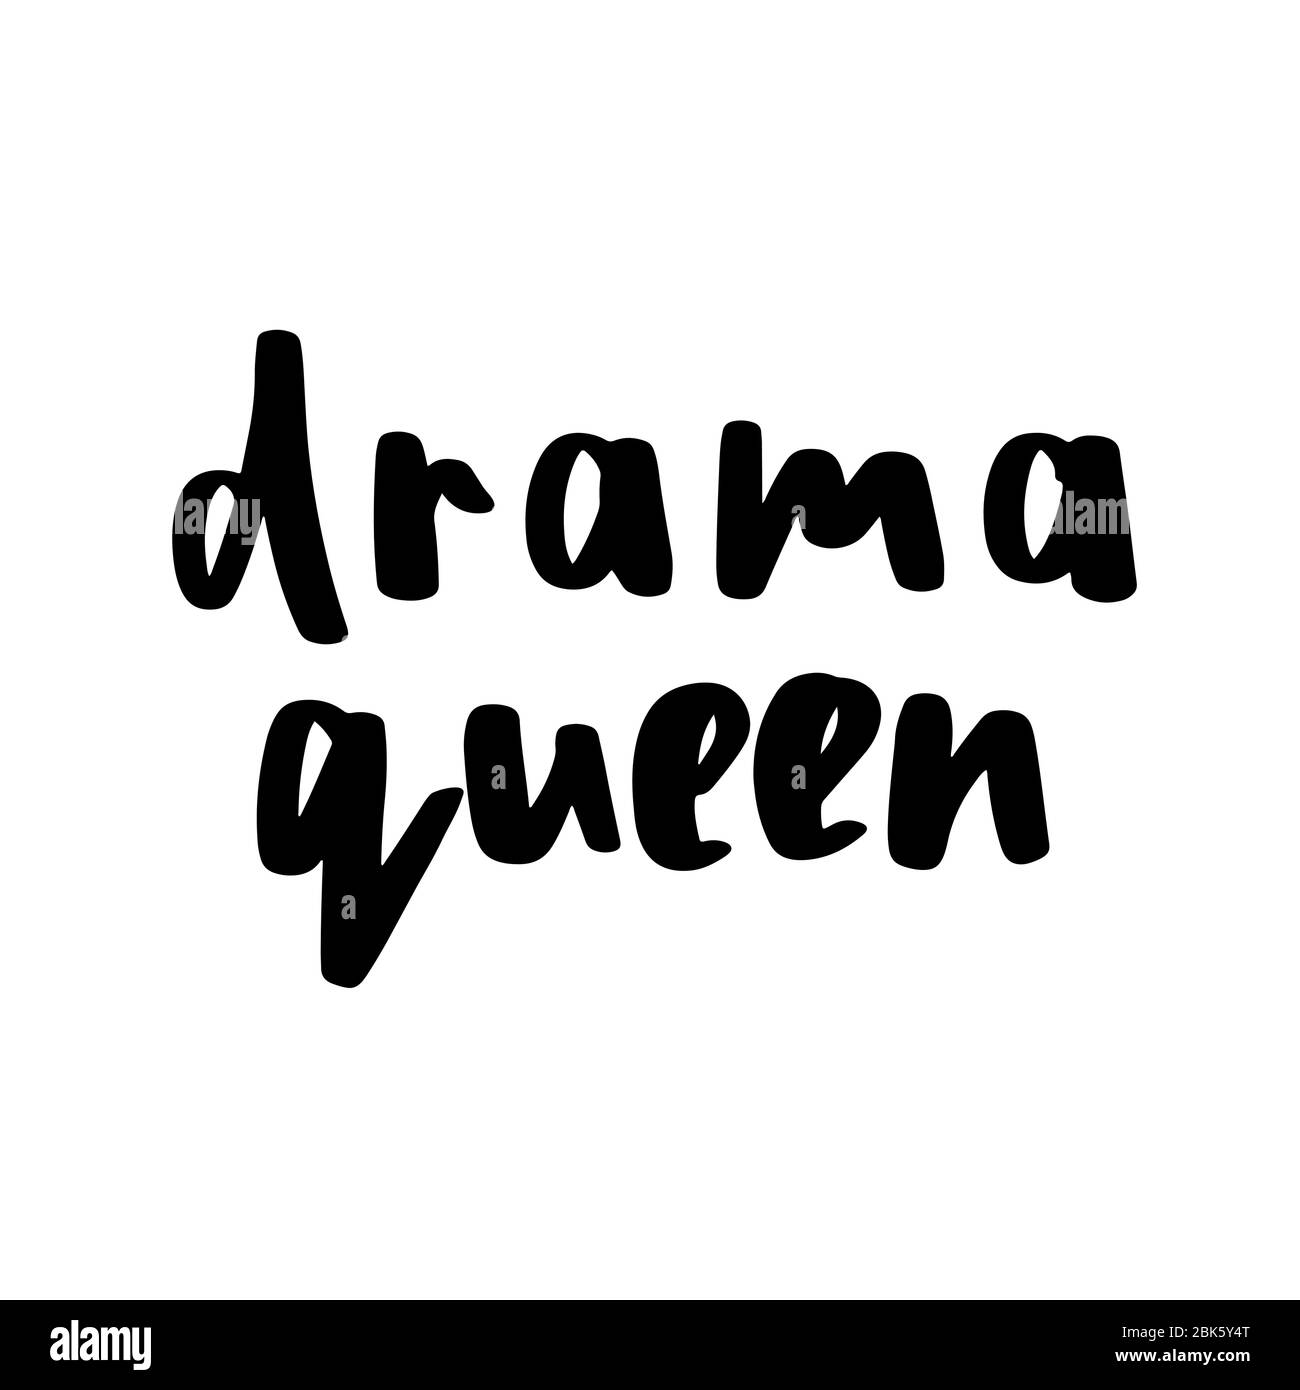 Drama Queen inscription in simple doodle style. Trendy print, handwritten slogan. Girly lettering design for t-shirt prints, phone cases, mugs or posters. Vintage hand drawn text, vector illustration Stock Vector